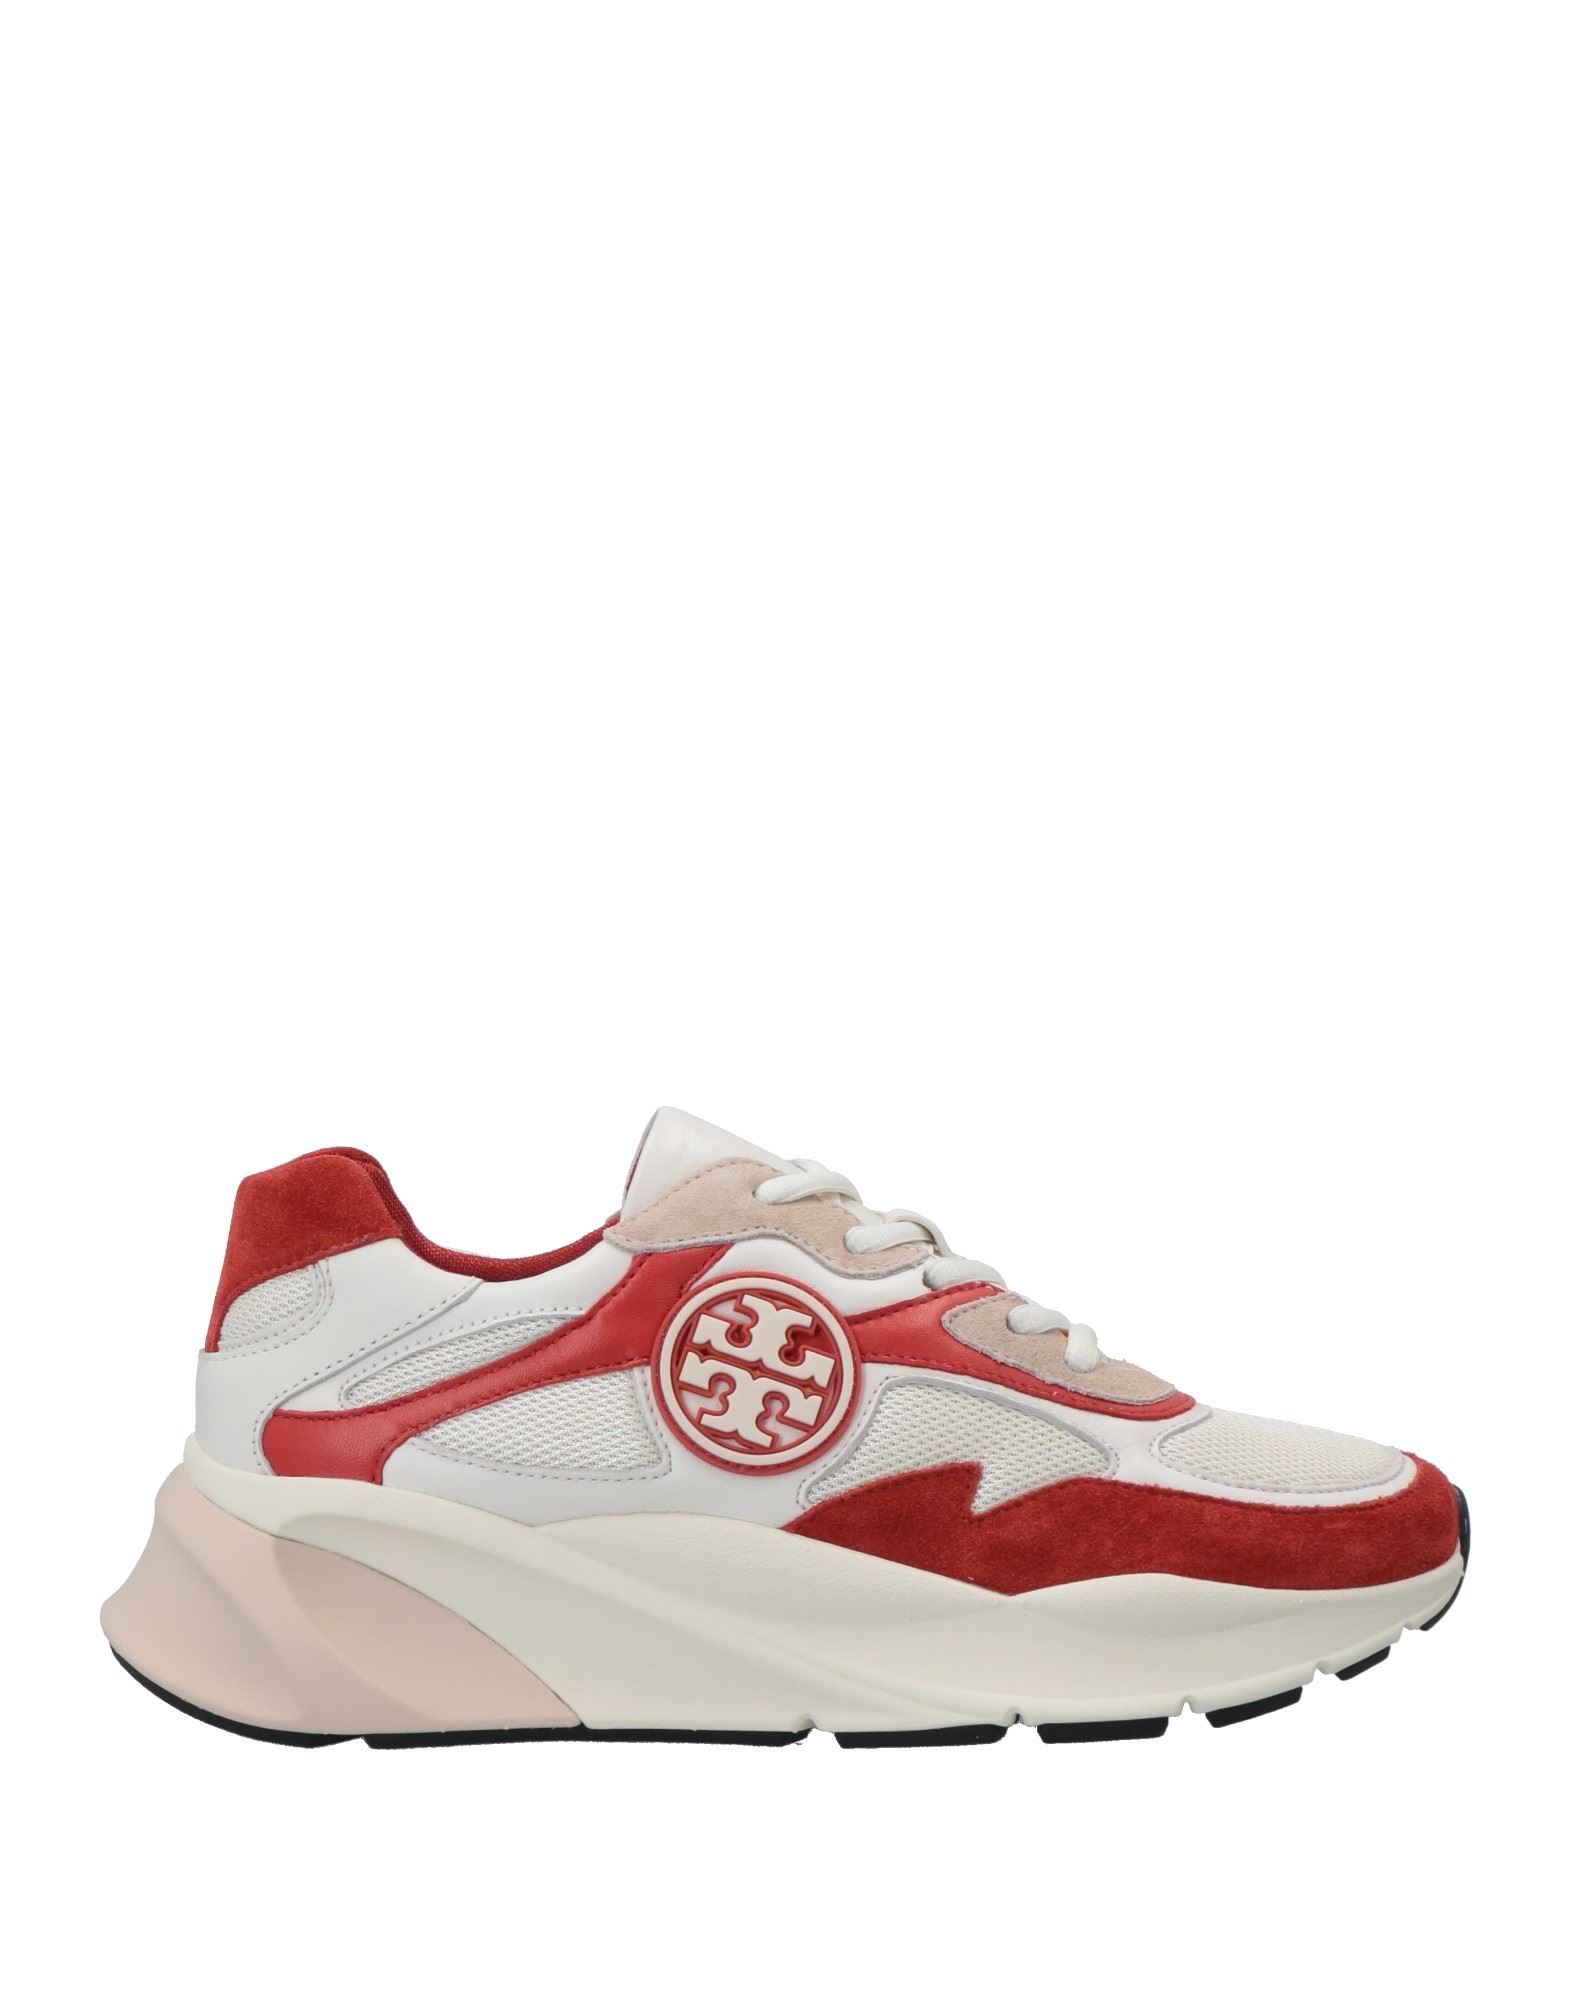 Tory Burch Sneakers In Red | ModeSens